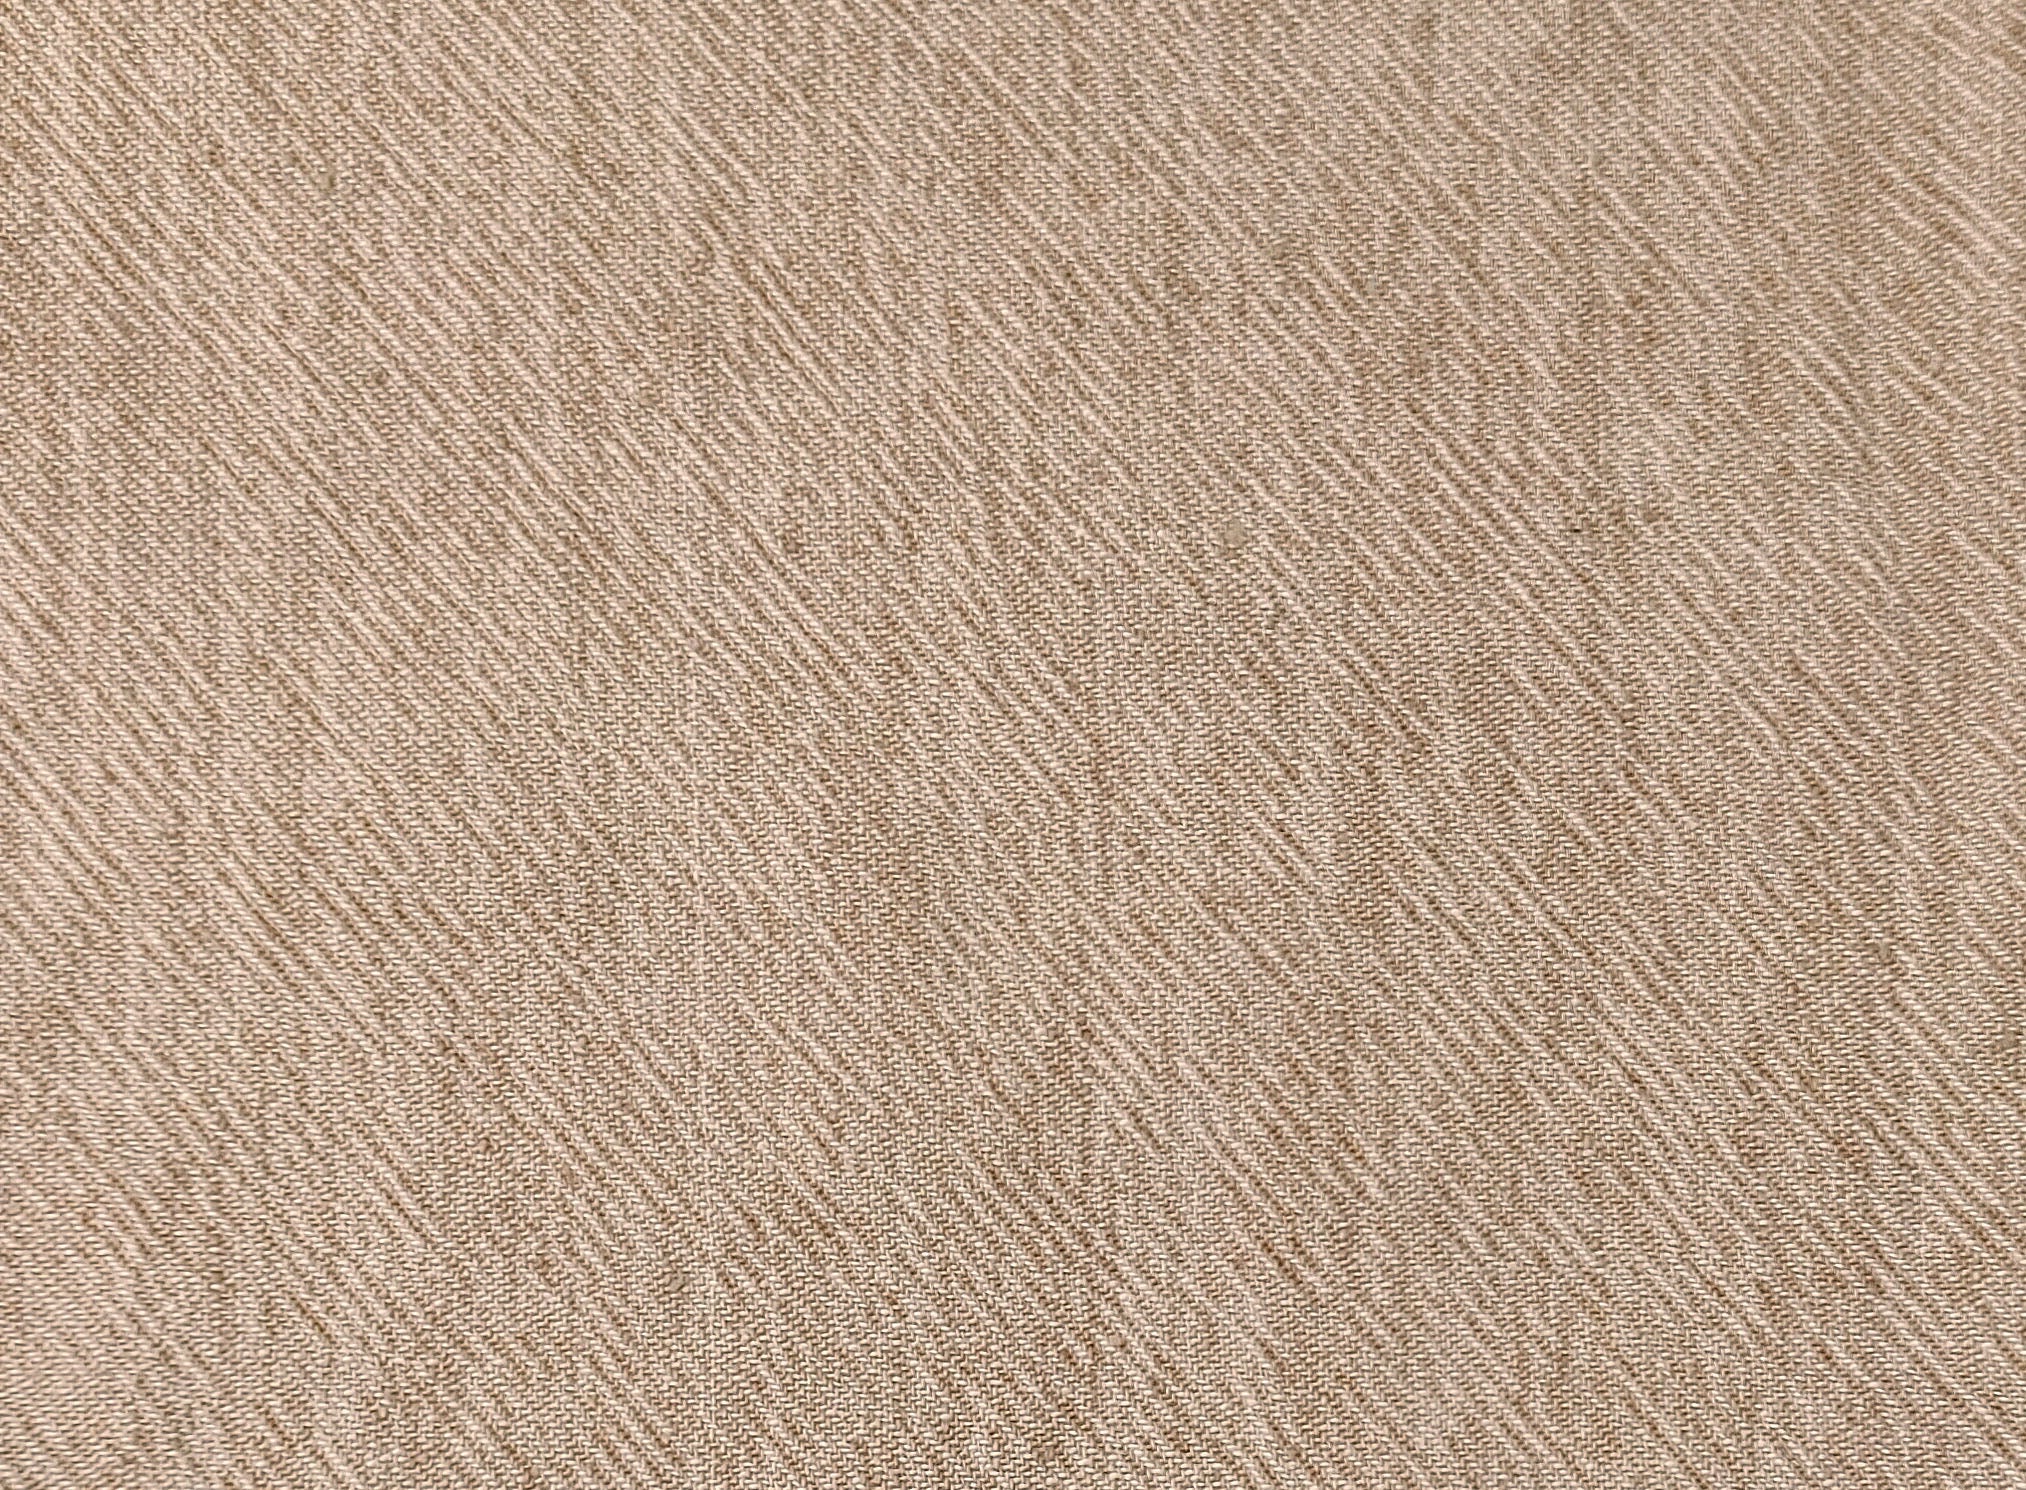 Heavyweight Linen Cotton Twill Fabric with Two-Tone Chambray 7258 7259 7331 7332 - The Linen Lab - Beige